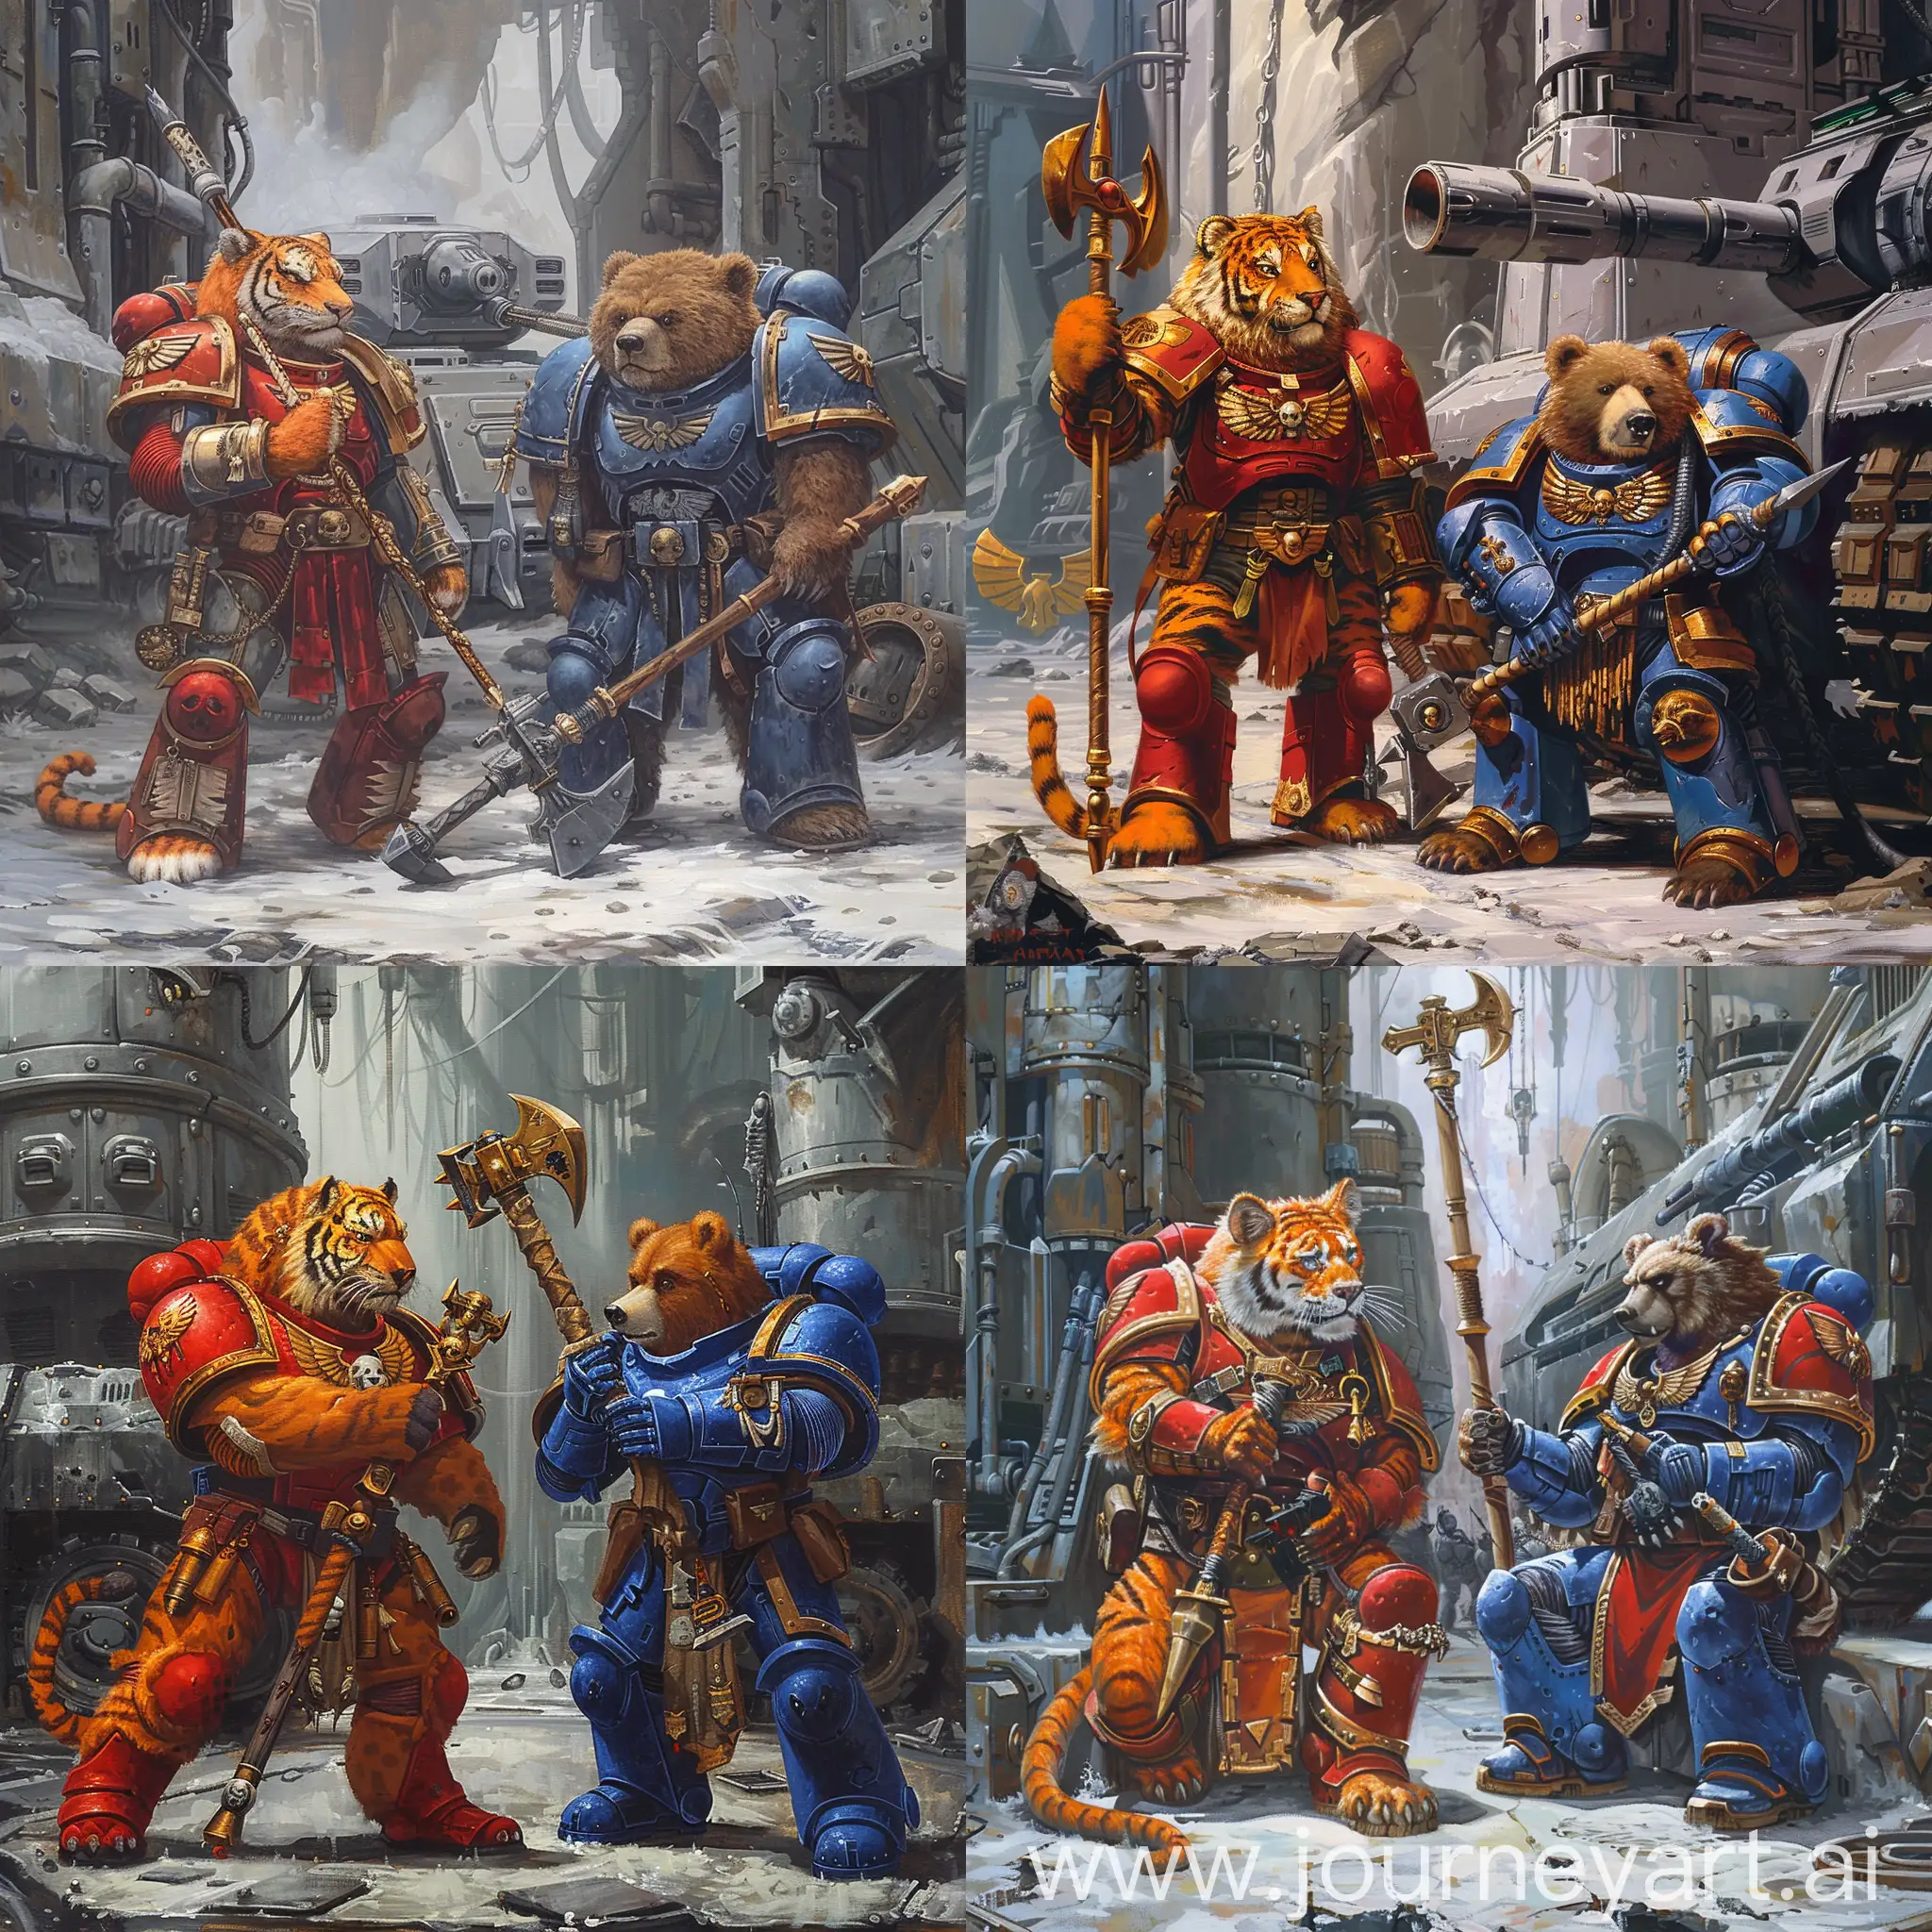 Historic fine art painting style:

at left, a furry orange tiger warrior in red and golden space marine armor and boots, this tiger holds a  golden long pole axe in hands,

at right, a furry brown bear warrior in blue and deep gray space marine armor and deep gray boots, this bear holds a deep gray long pole warhammer in hands,

they are next to each other, both before a futuristic gray steel tank, inside a futuristic military base,
